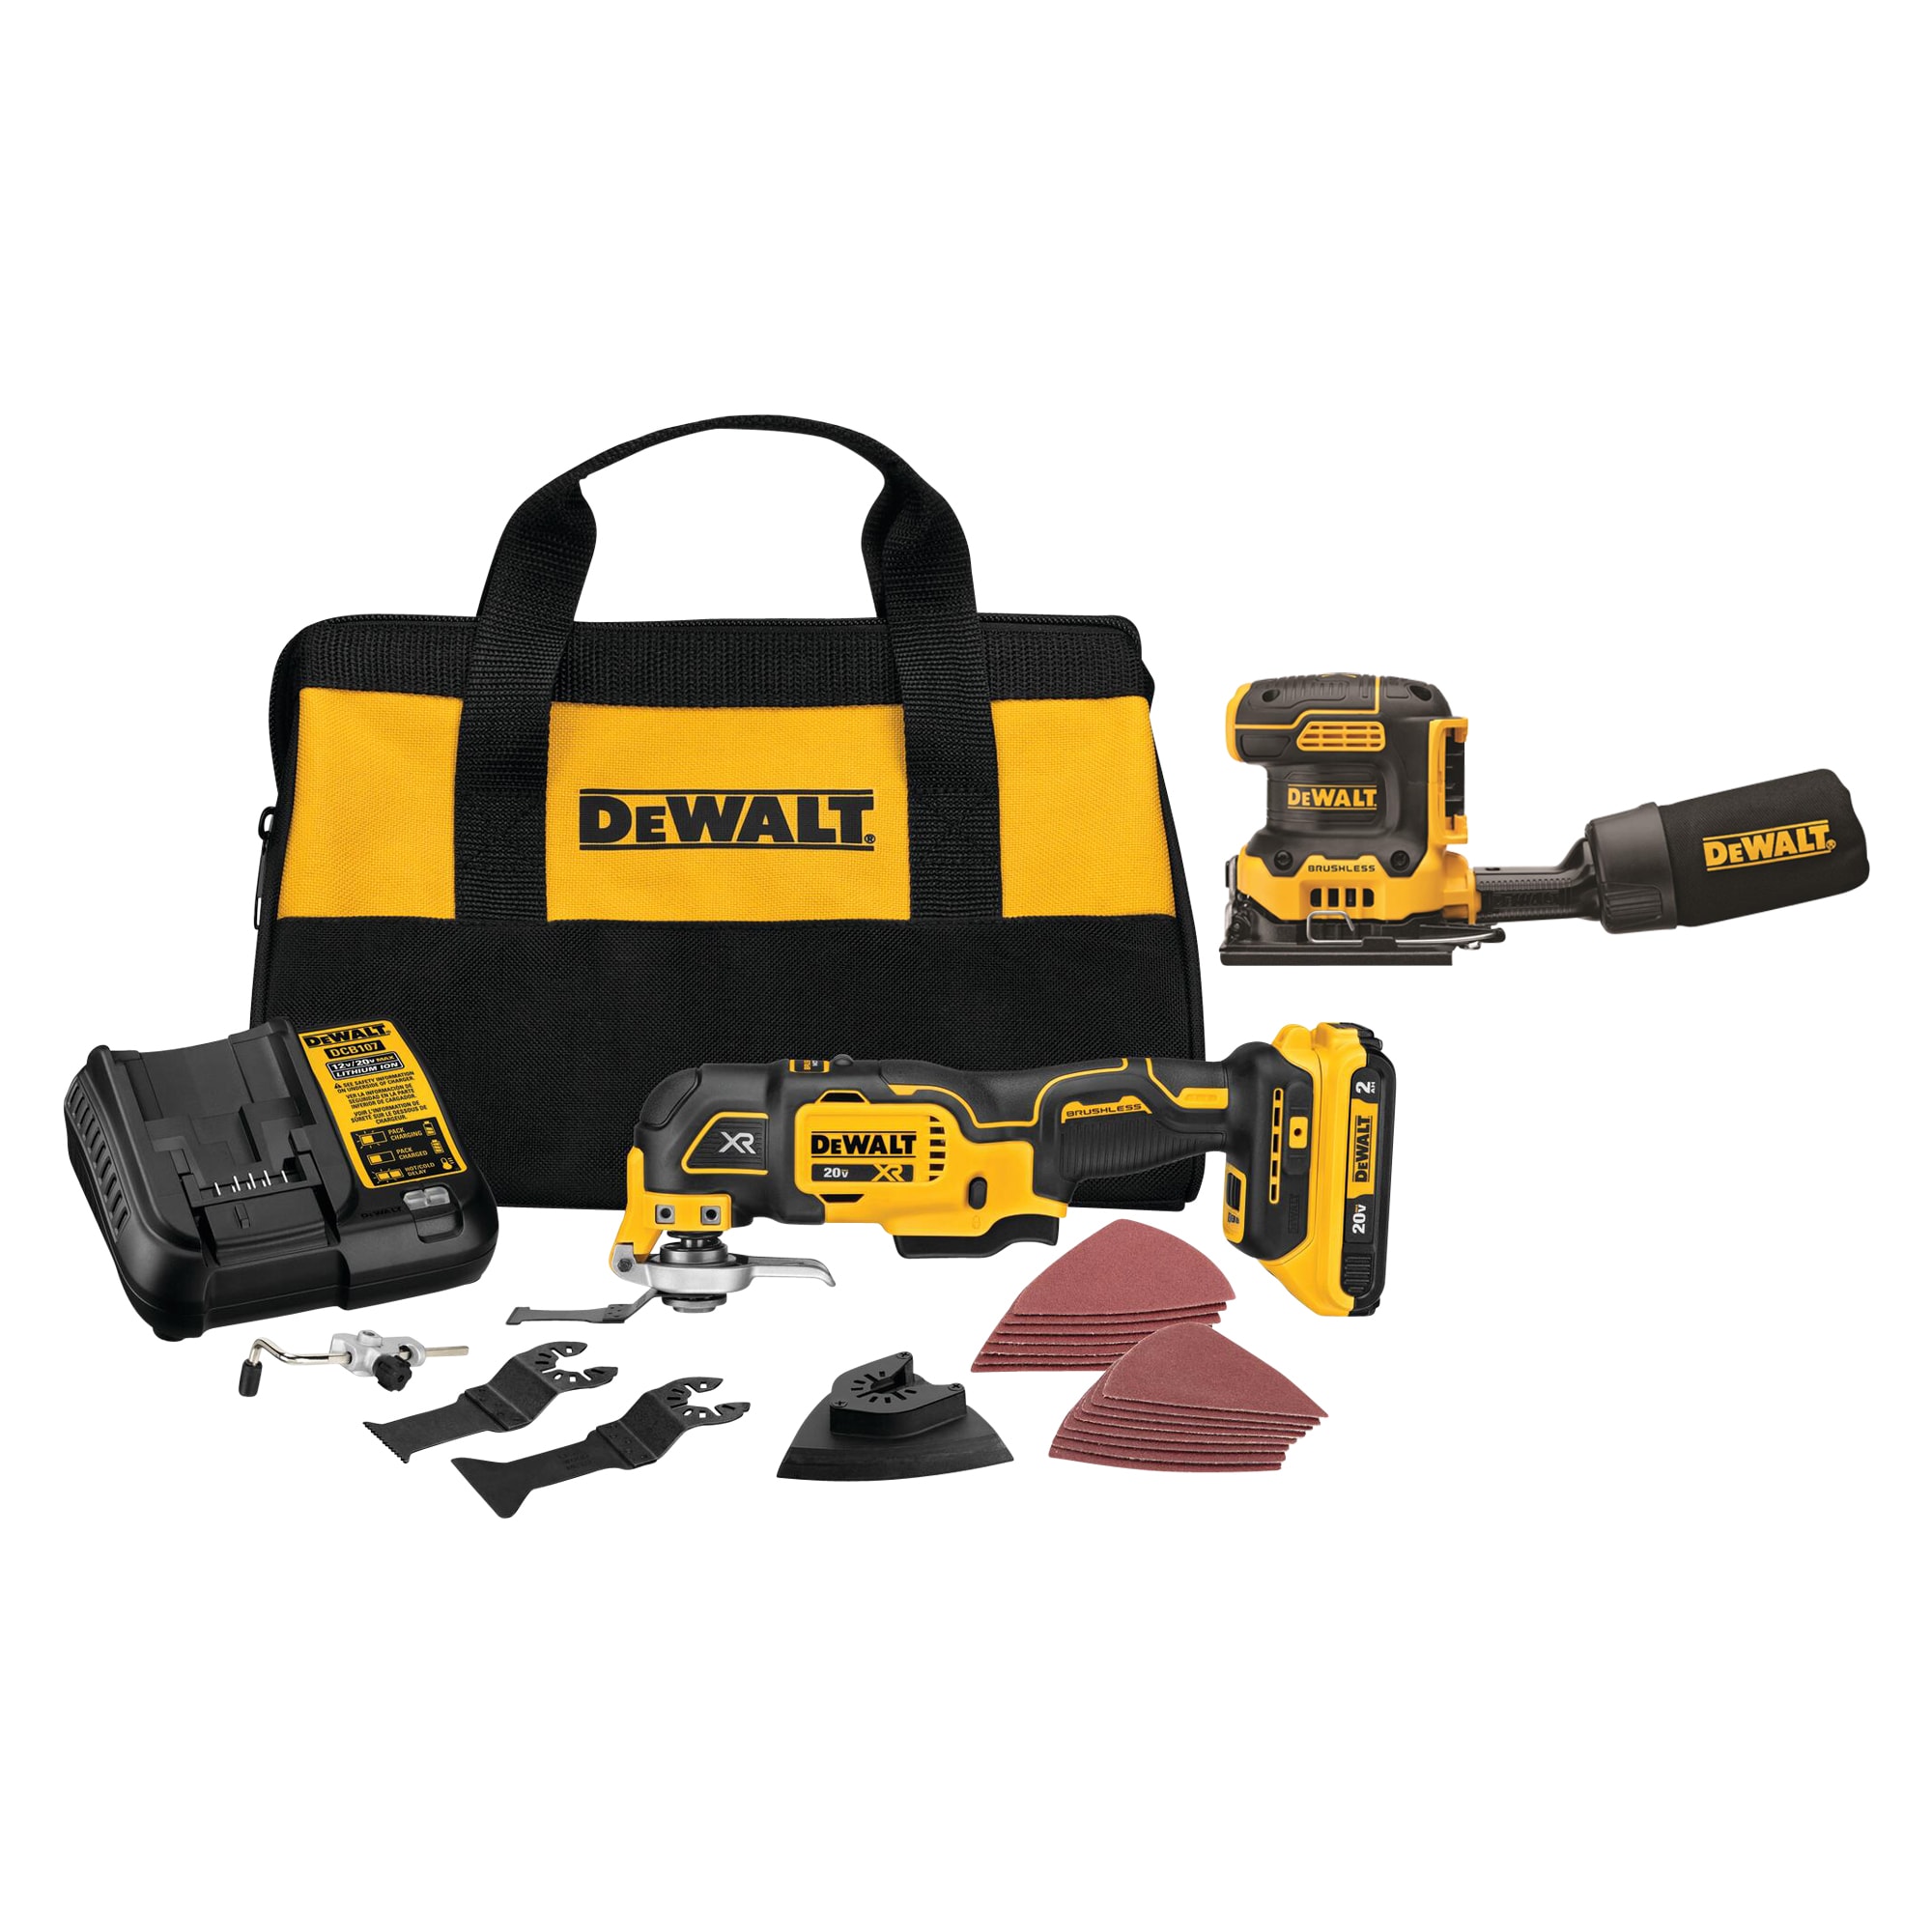 DEWALT XR 8-Piece Brushless 20-volt Max 3-speed Oscillating Multi-Tool Kit with Soft Case (1-Battery Included) & XR 20-Volt Brushless Cordless